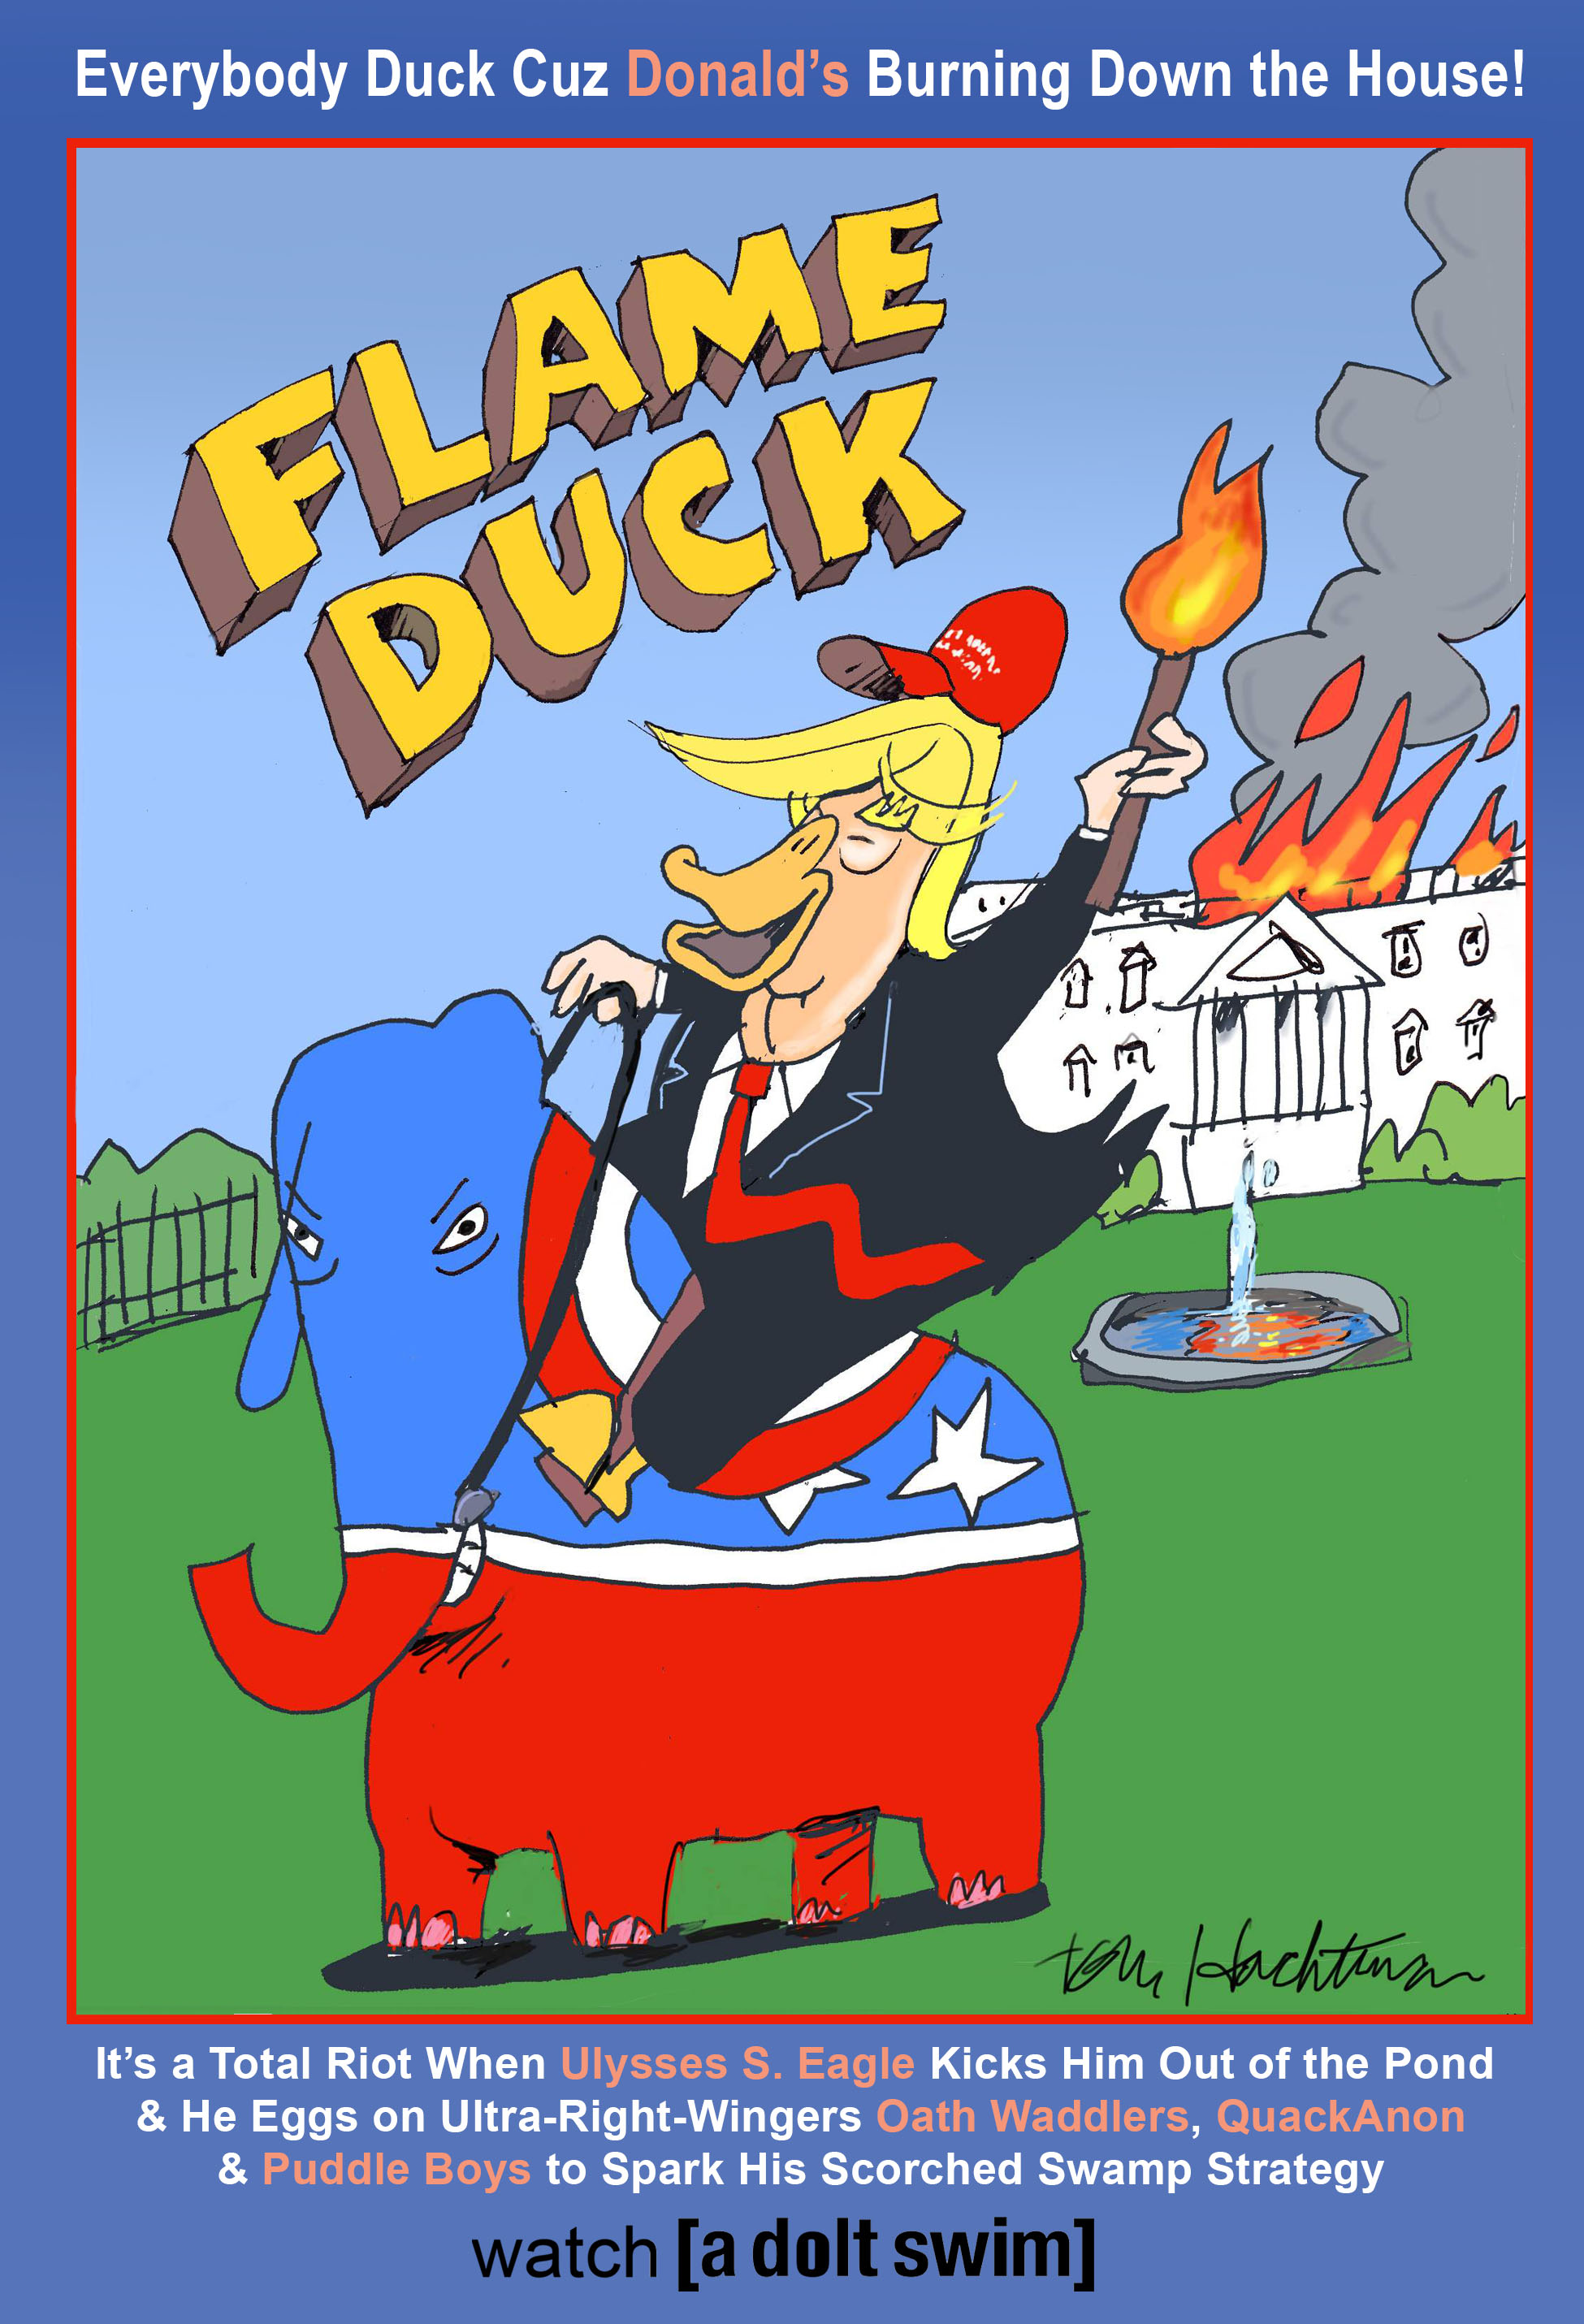 Spoof poster for an animated series on A Dolt Swim entitled Flame Duck starring Donald Trump as a duck riding an RNC elephant wearing a MAGA hat and holding a torch leaving the White House which he has set ablaze.